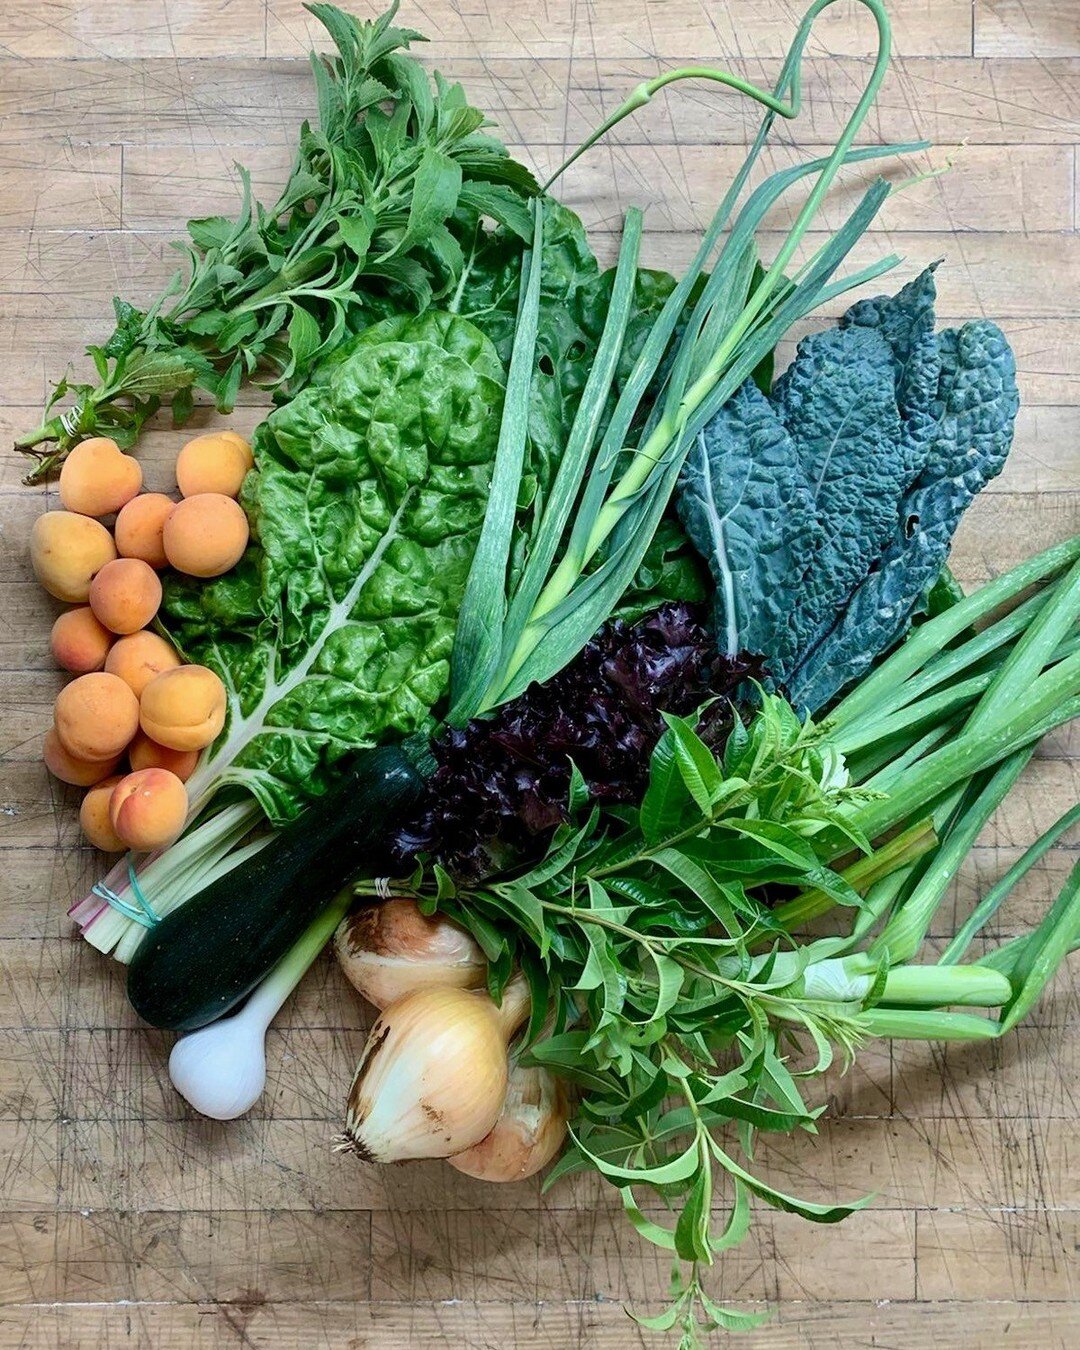 Happy Fathers Day and Happy #csasunday !!
This week our members are enjoying fresh picked: Rainbow chard, Kale - Black magic, Lettuce - red salanova, Zucchini - Desert, Onion - Candy, Spring Garlic - Music, Lemon Verbena, Stevia and Apricots - Blenhe